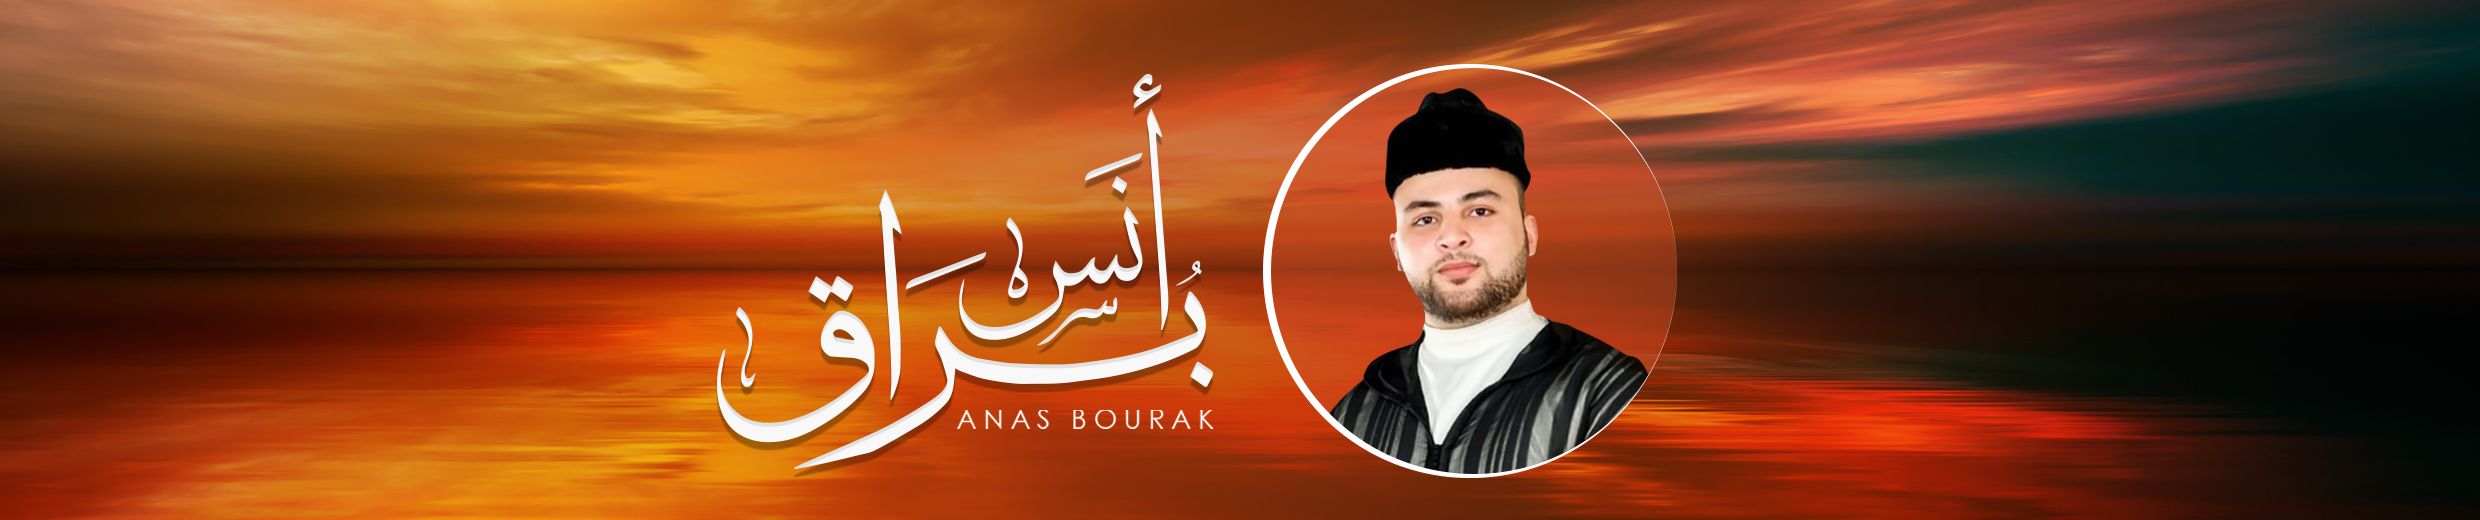 Stream Anas bourak _ أنس براق music | Listen to songs, albums, playlists  for free on SoundCloud